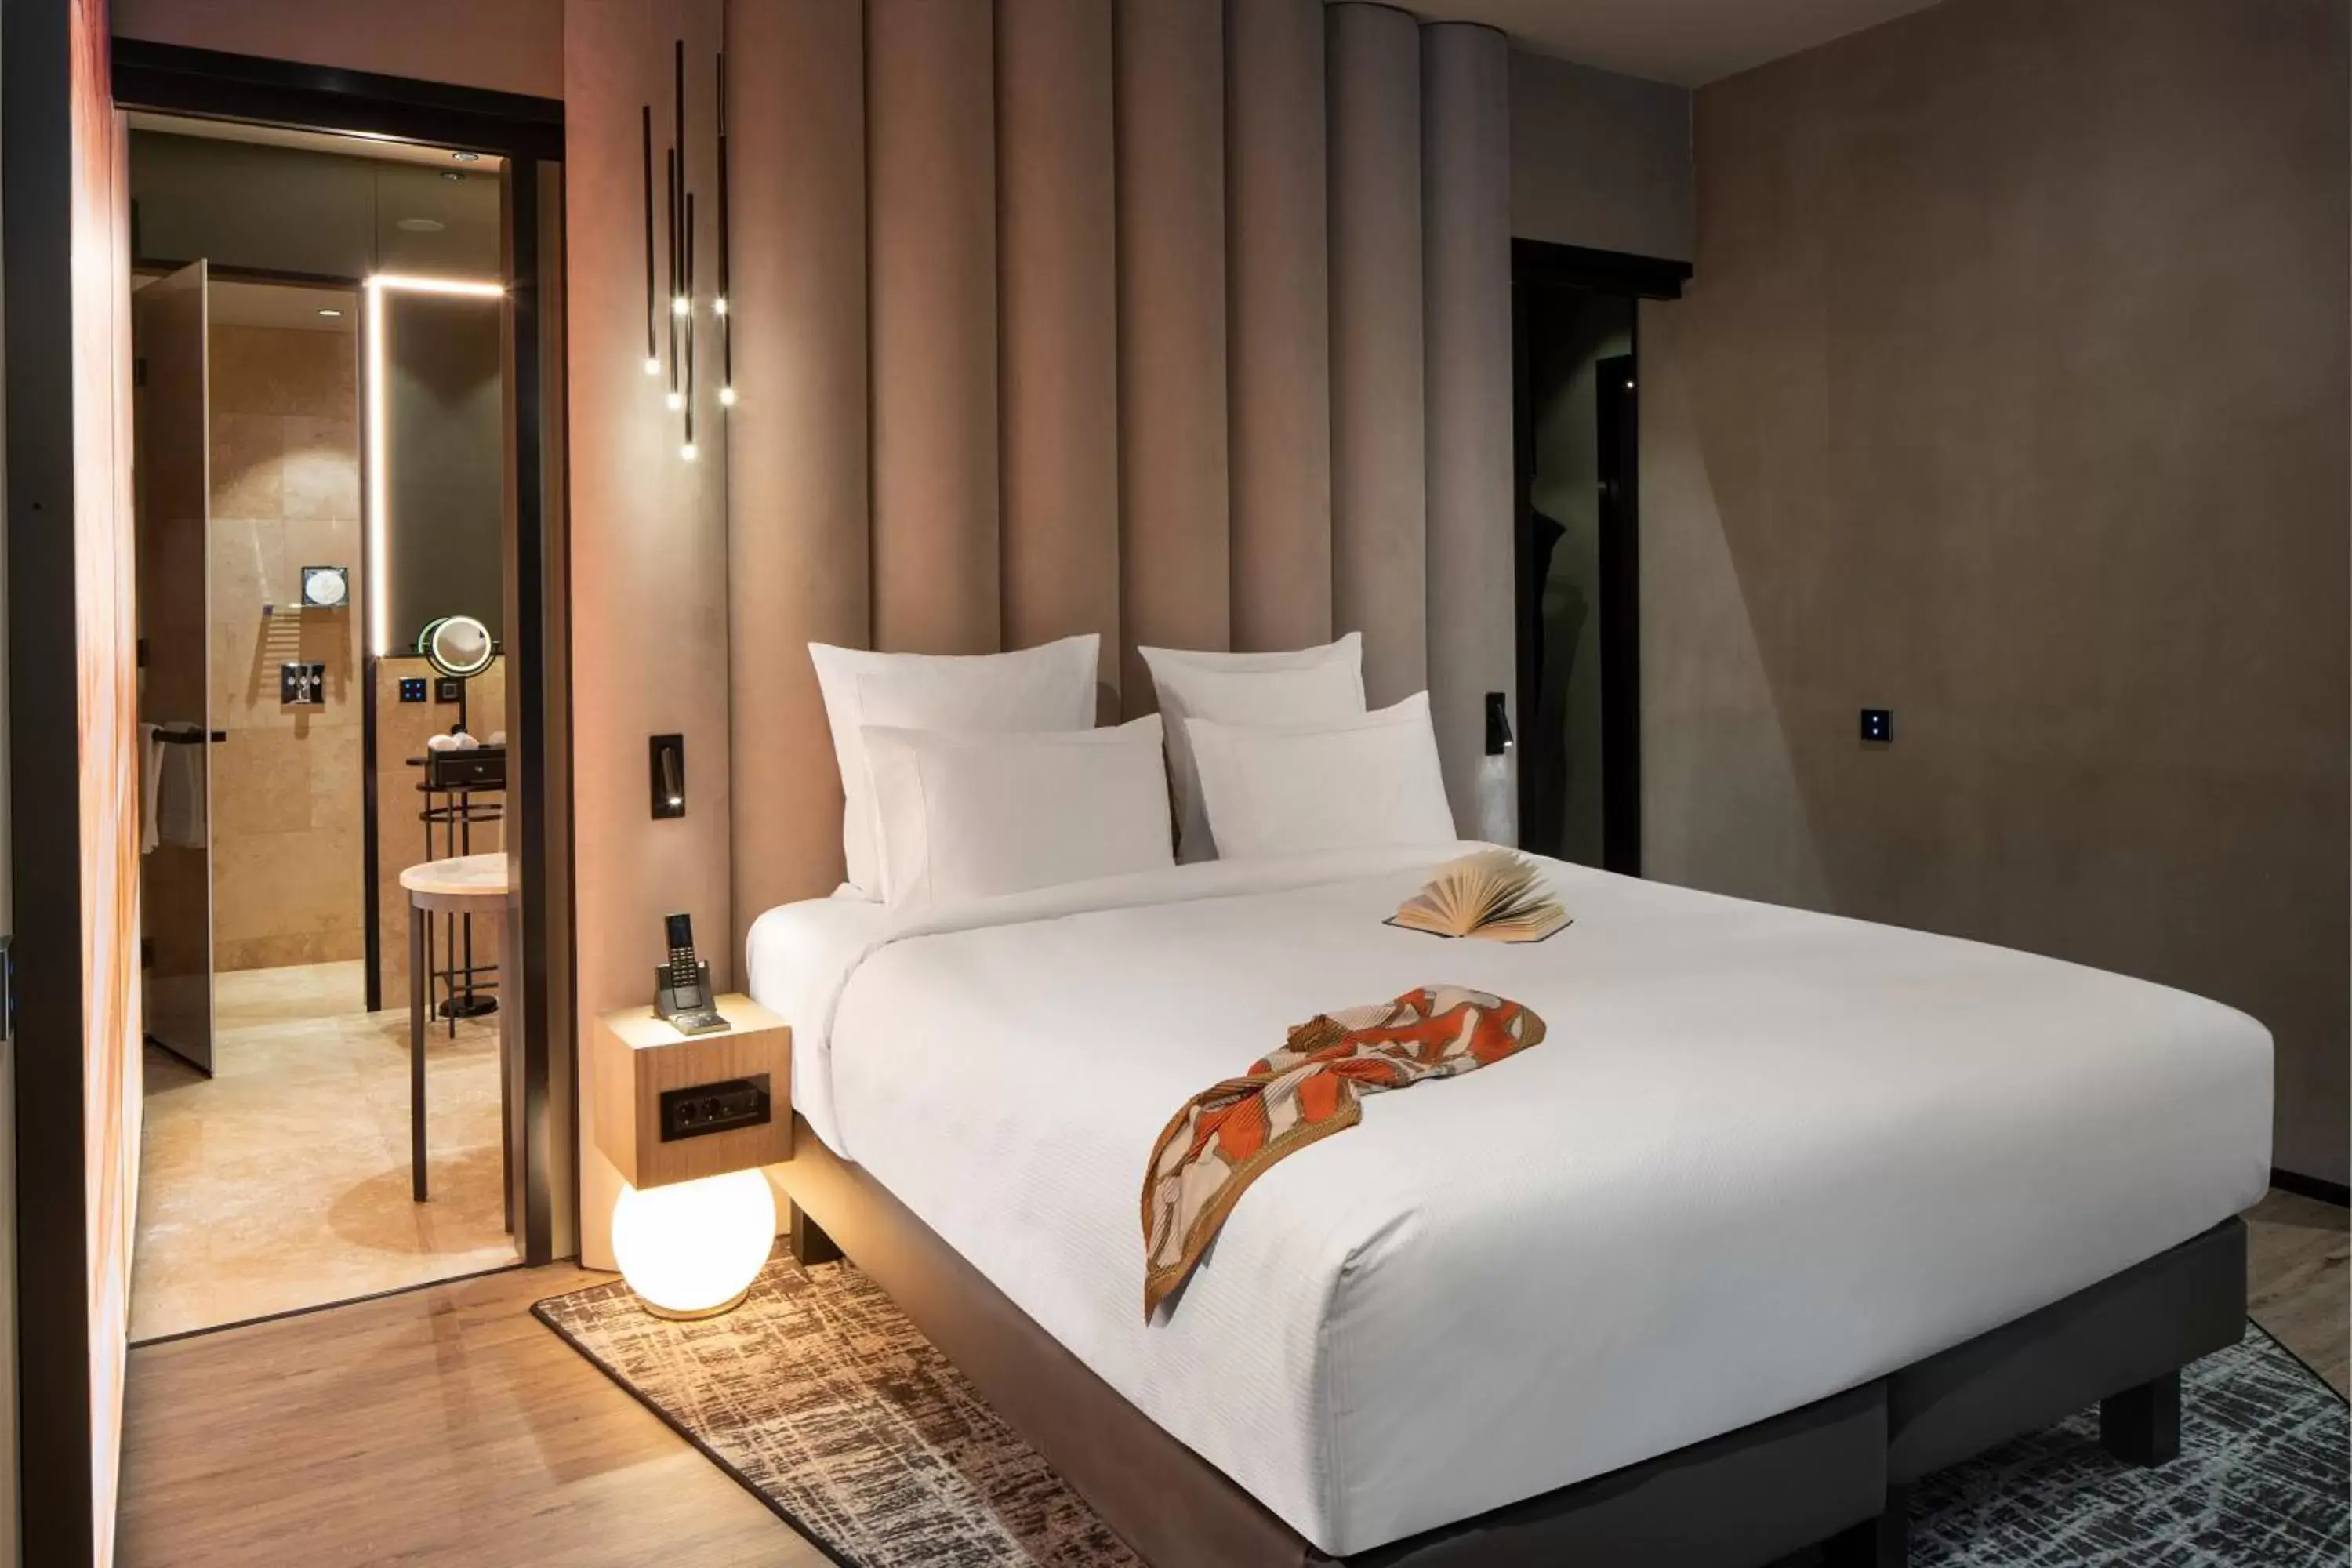 Bed in The Emporium Plovdiv - MGALLERY The Best 5-Star Boutique Hotel on The Balkans for 2022